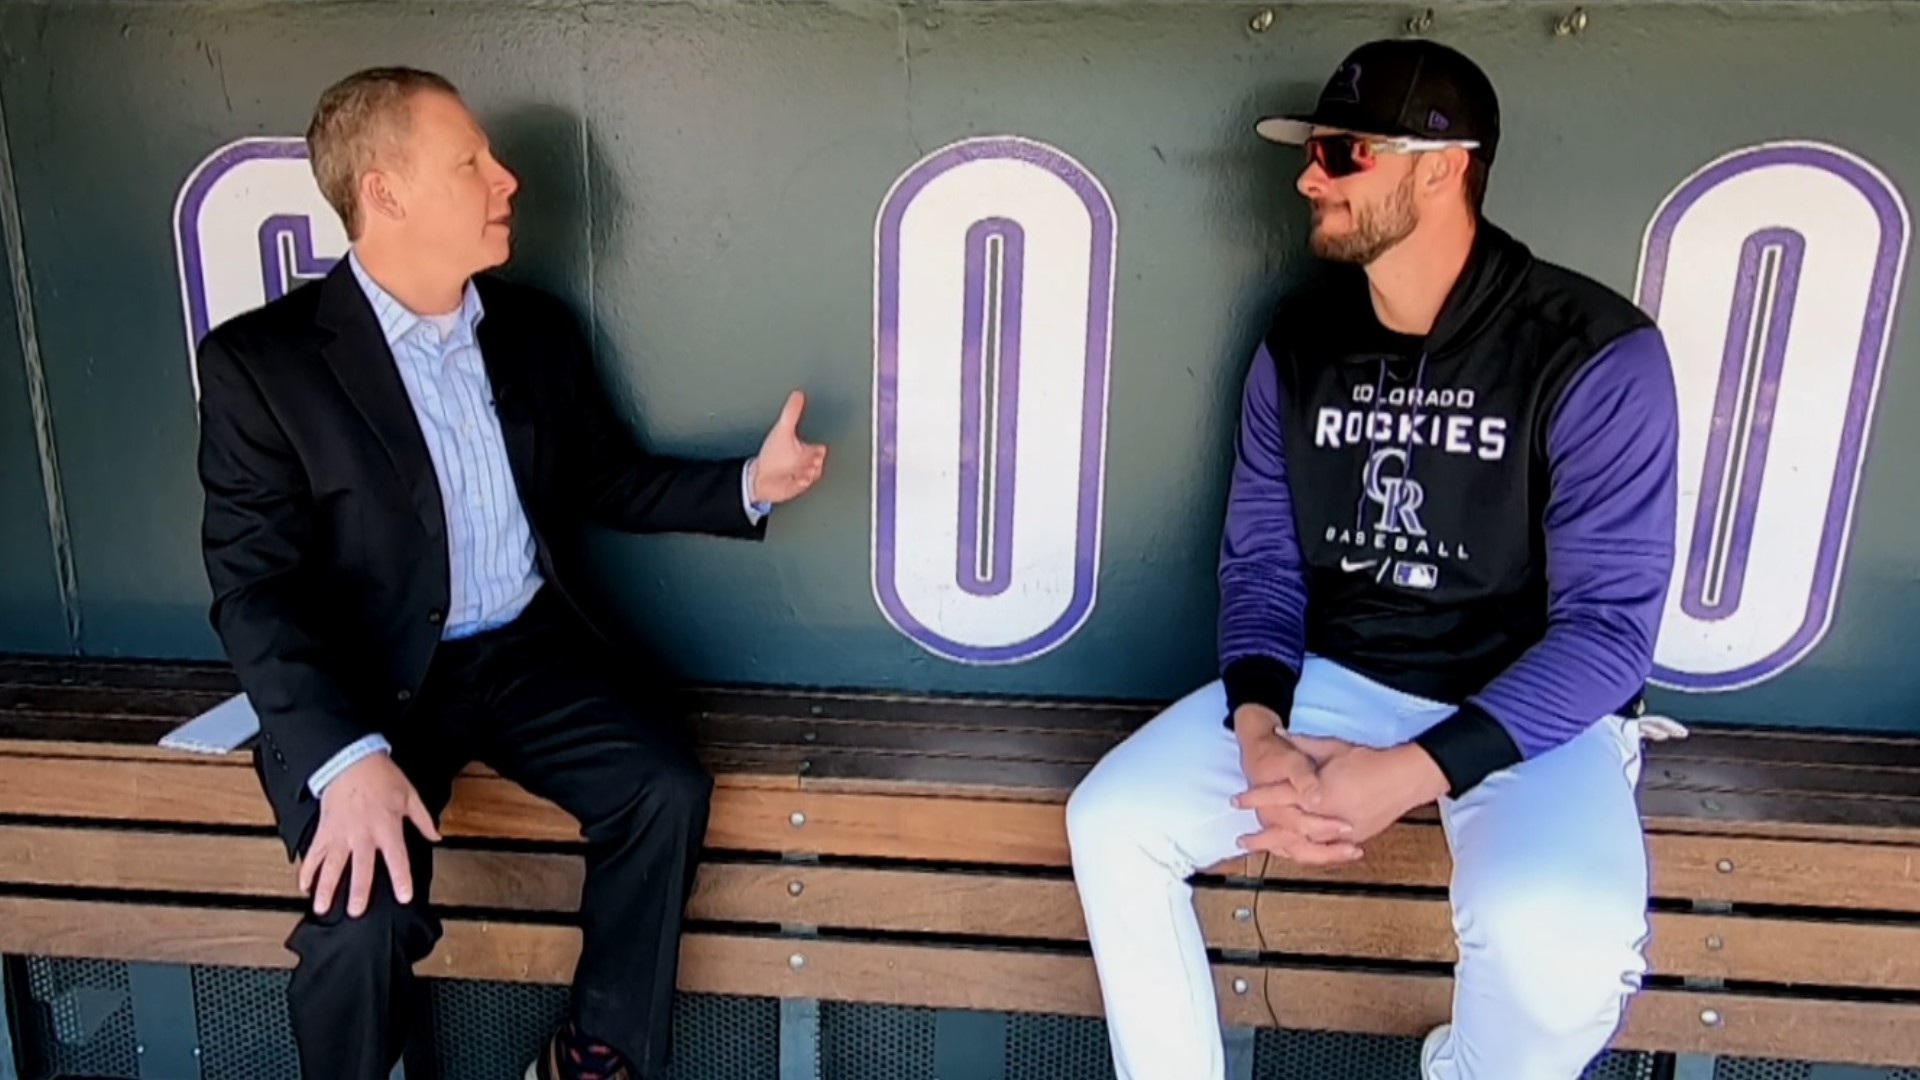 9NEWS Sports Director Rod Mackey sat down the Rockies' new star third baseman in the Coors Field dugout.